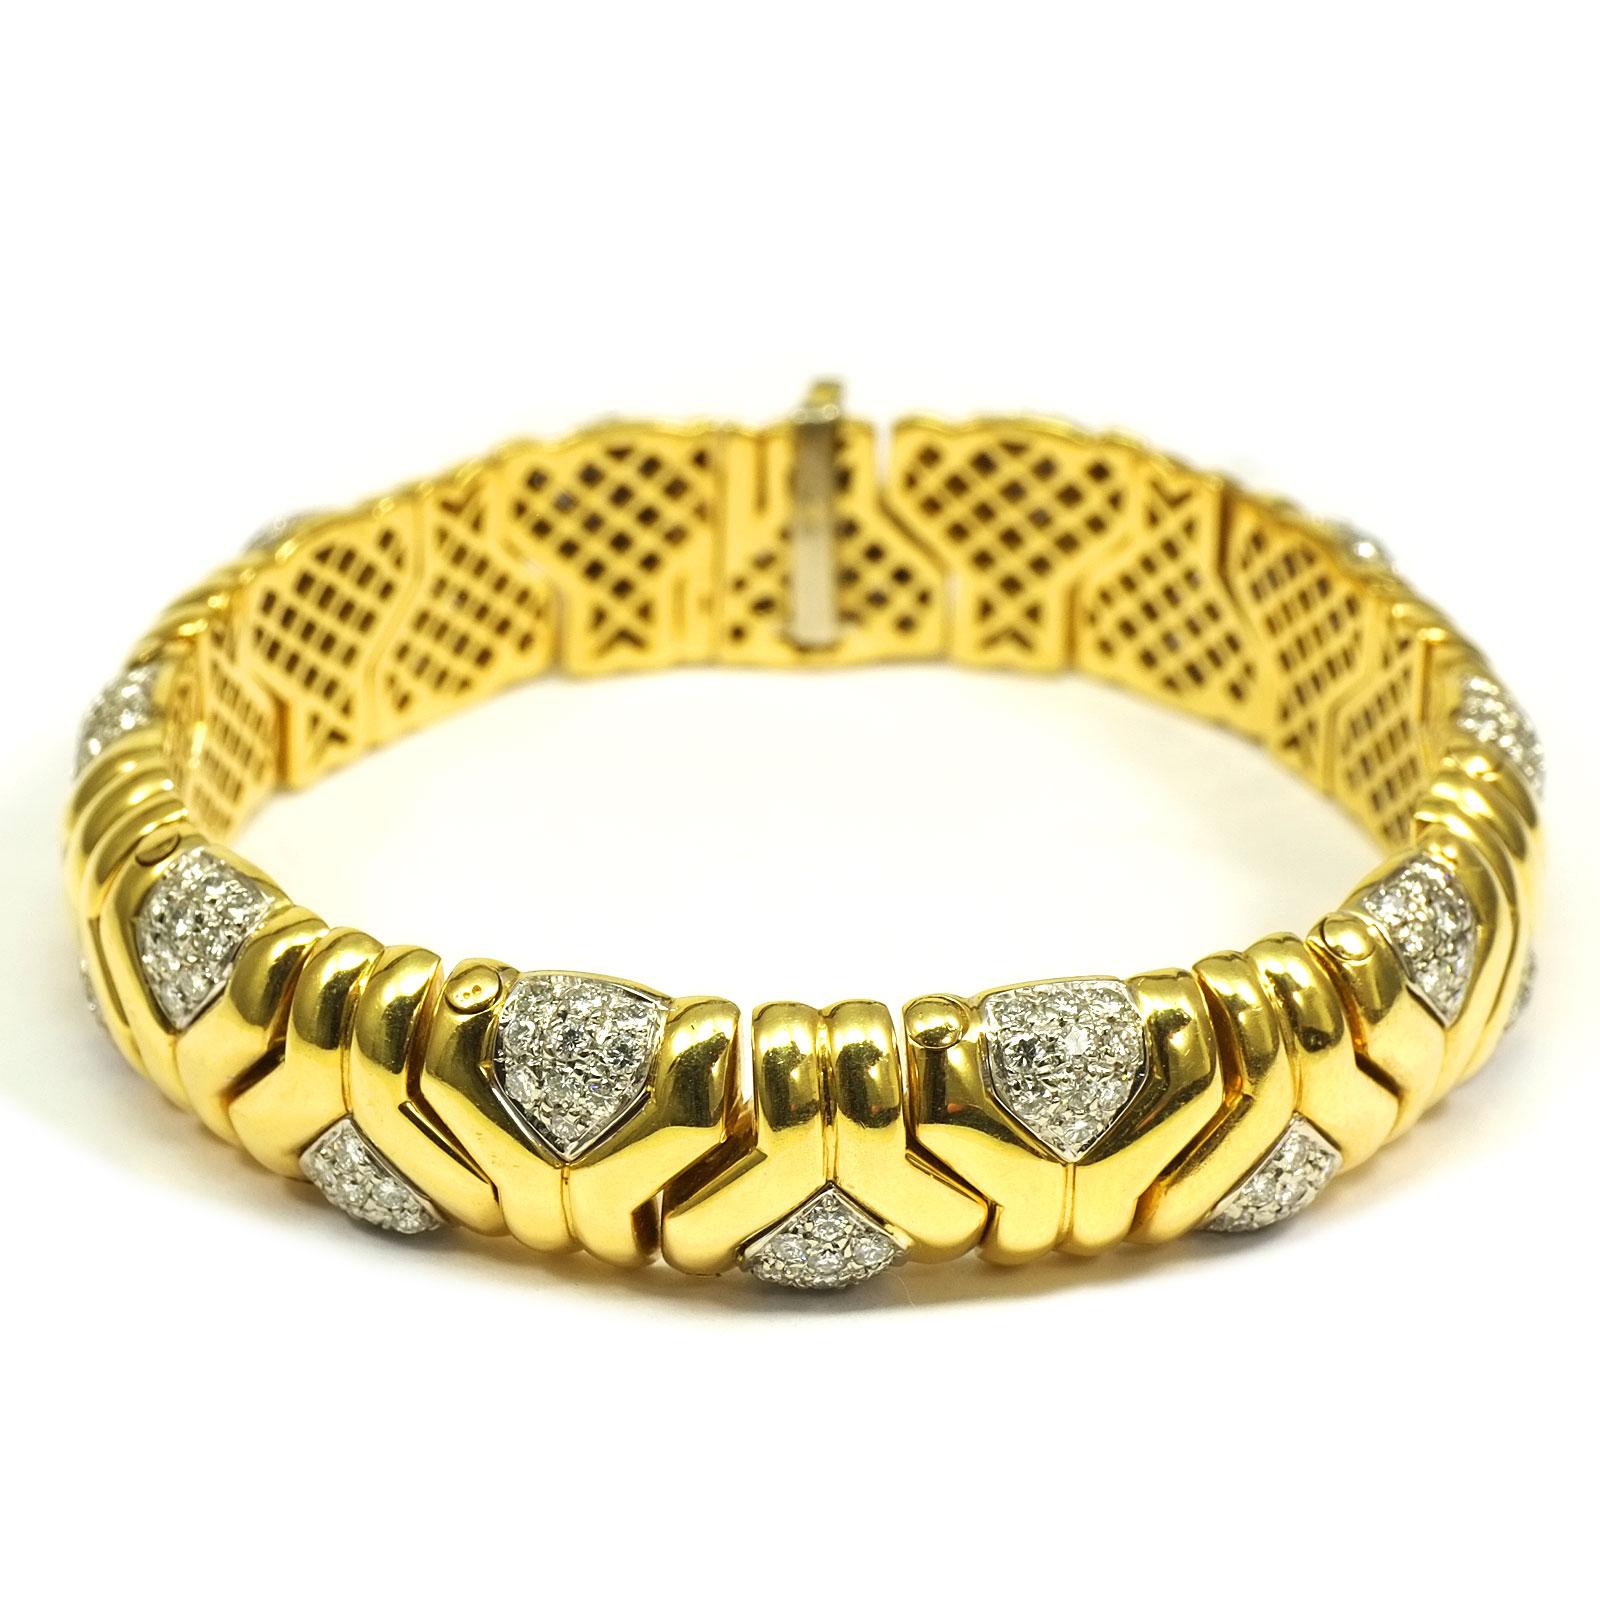 4 Carat Diamond 18K Yellow Gold Fancy Link Bracelet

A sporty, elegant link bracelet with geometric decor. 200 brilliant diamonds with a total of 4 ct adorn the individual segments. The diamonds are set in white gold.

 
18 K yellow and white